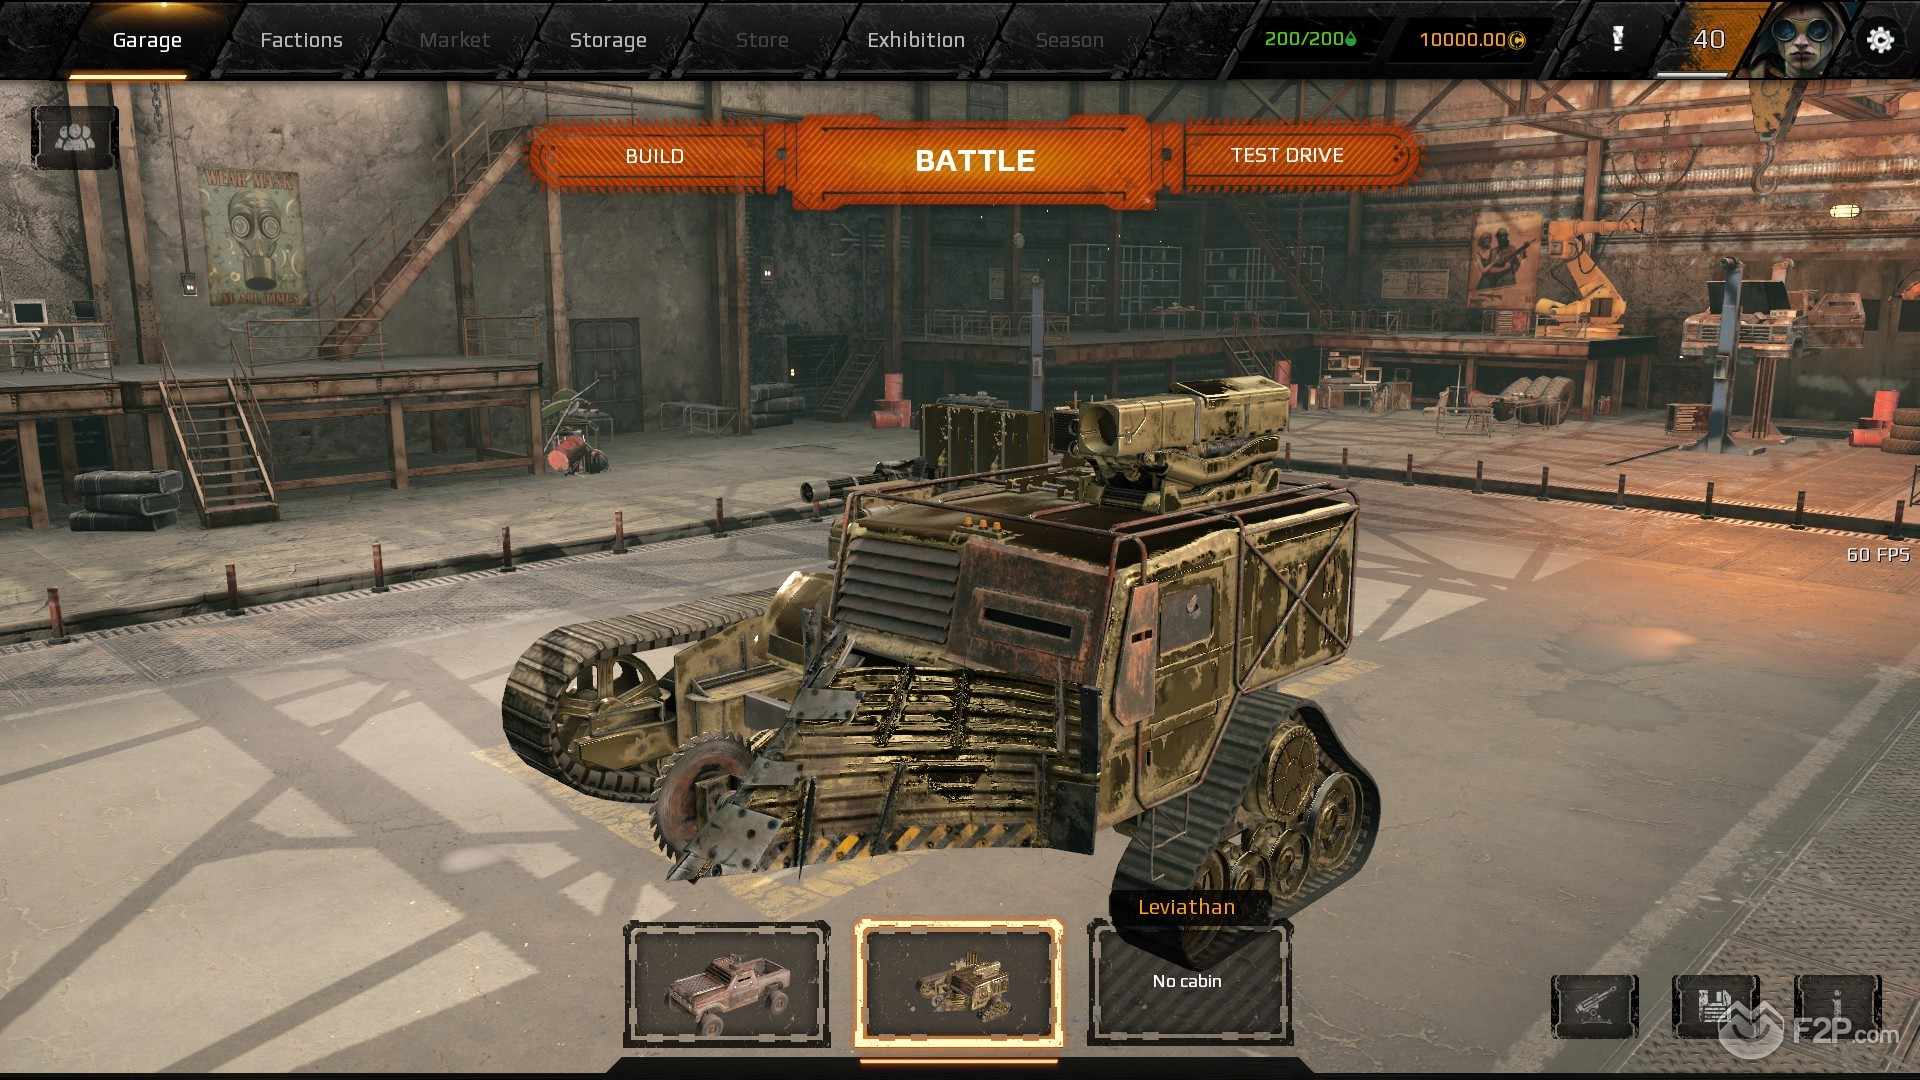 Crossout New 2021 Wallpapers